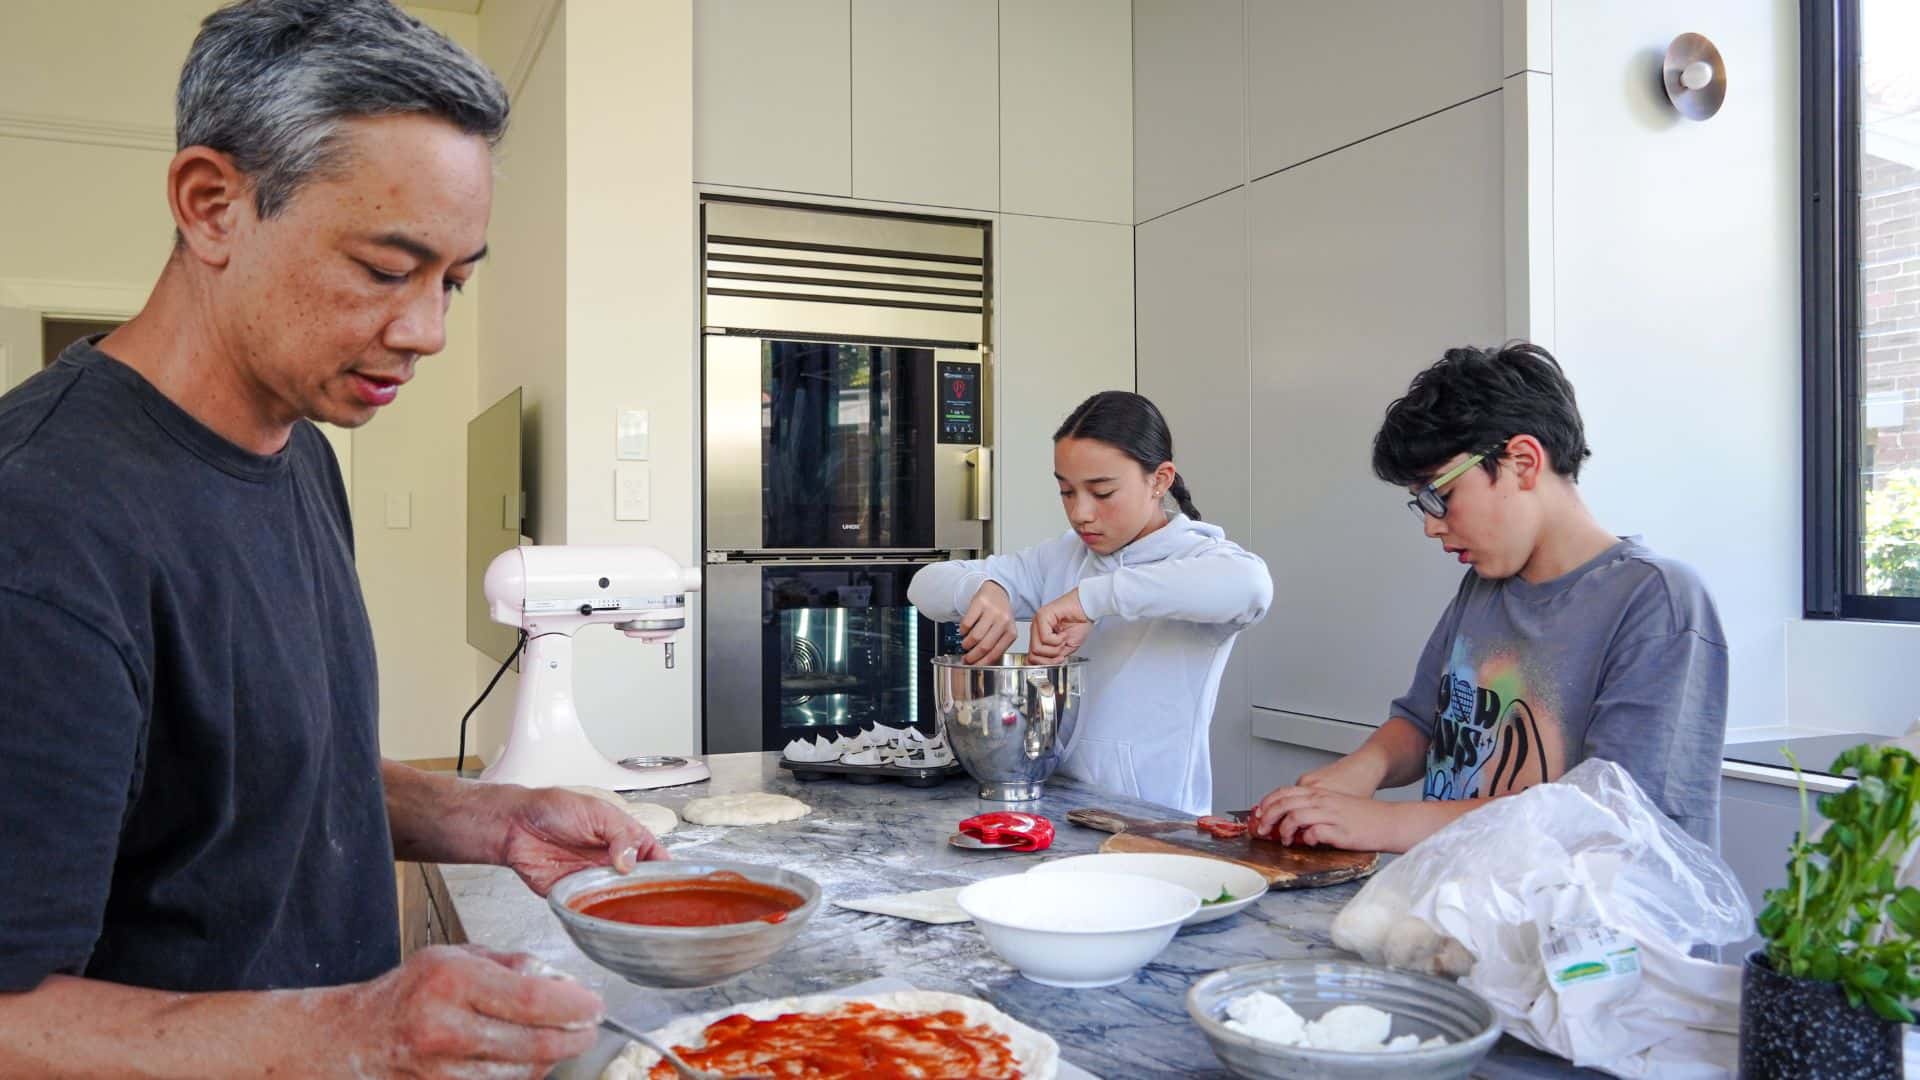 Christopher Thé preparing pizza with his children